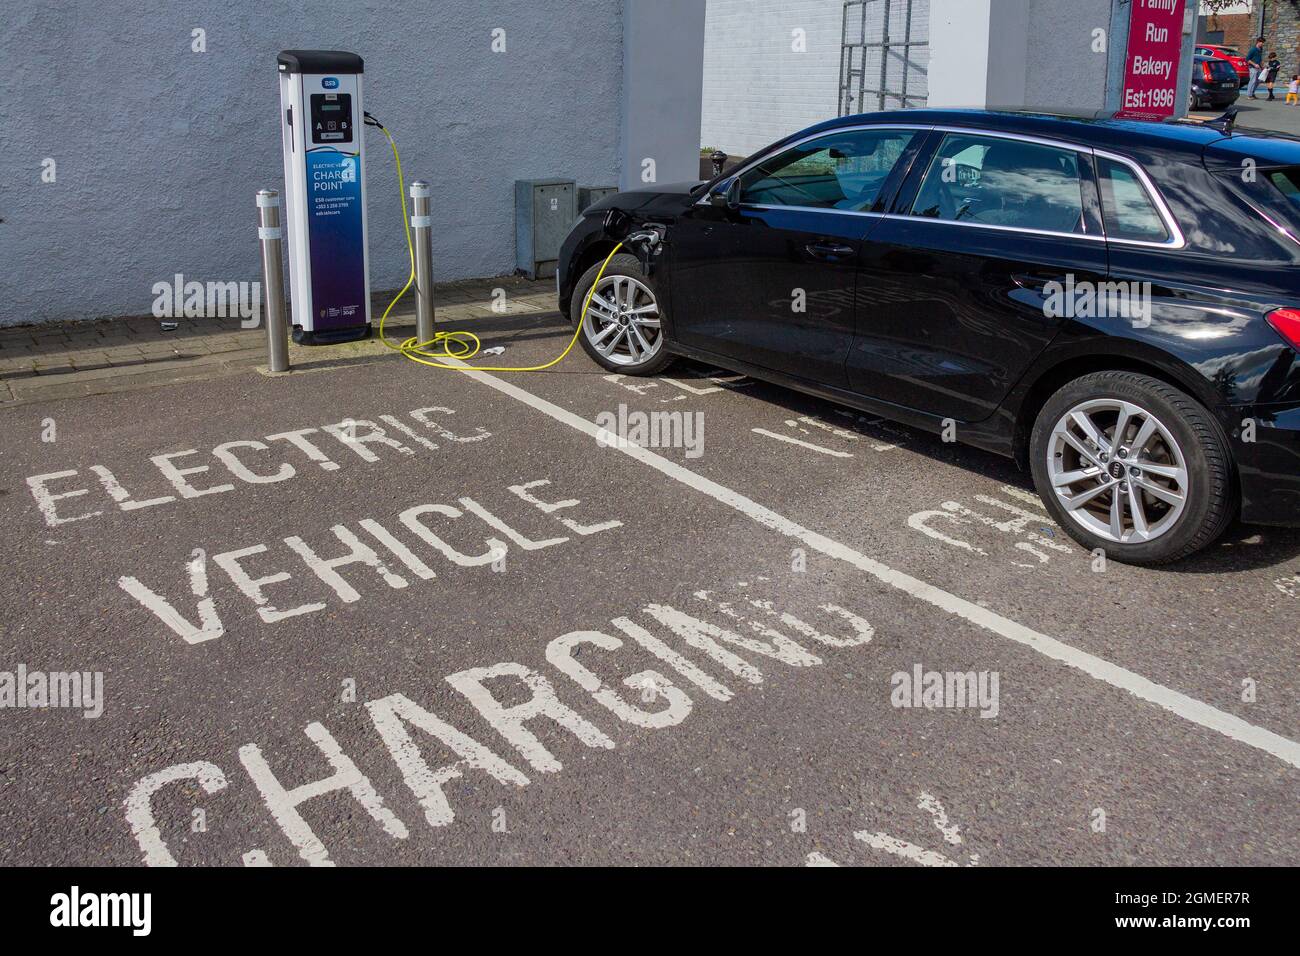 Audi E Tron at Electric Vehicle Charging Point Stock Photo